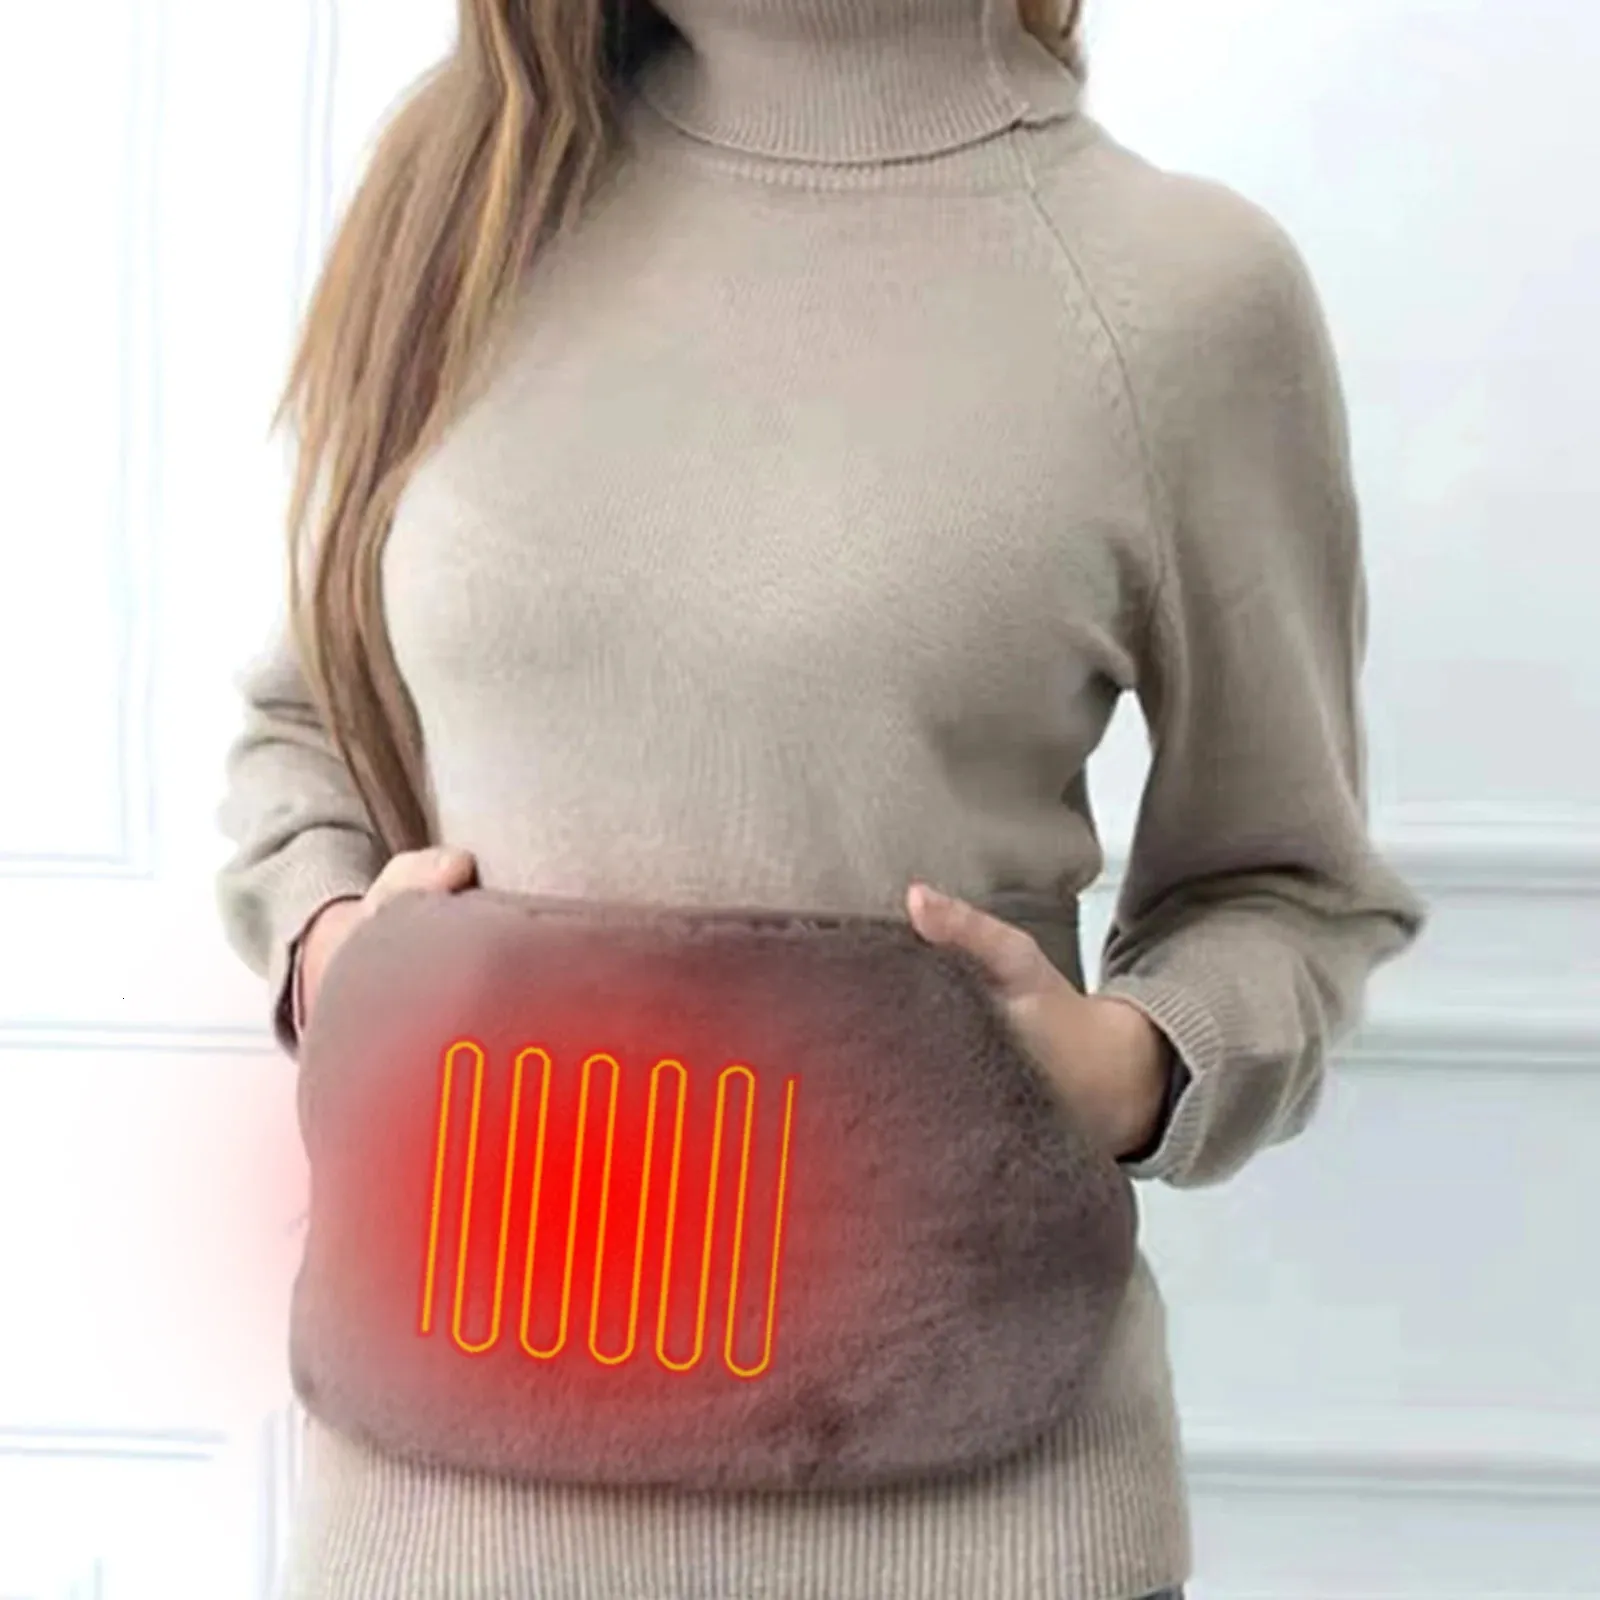 Portable Slim Equipment Heating Belt Adjustable Waist USB Electric Heating Magnetic Therapy For Menstrual Cramp Lumbar Abdominal Leg Pain Relief 231220